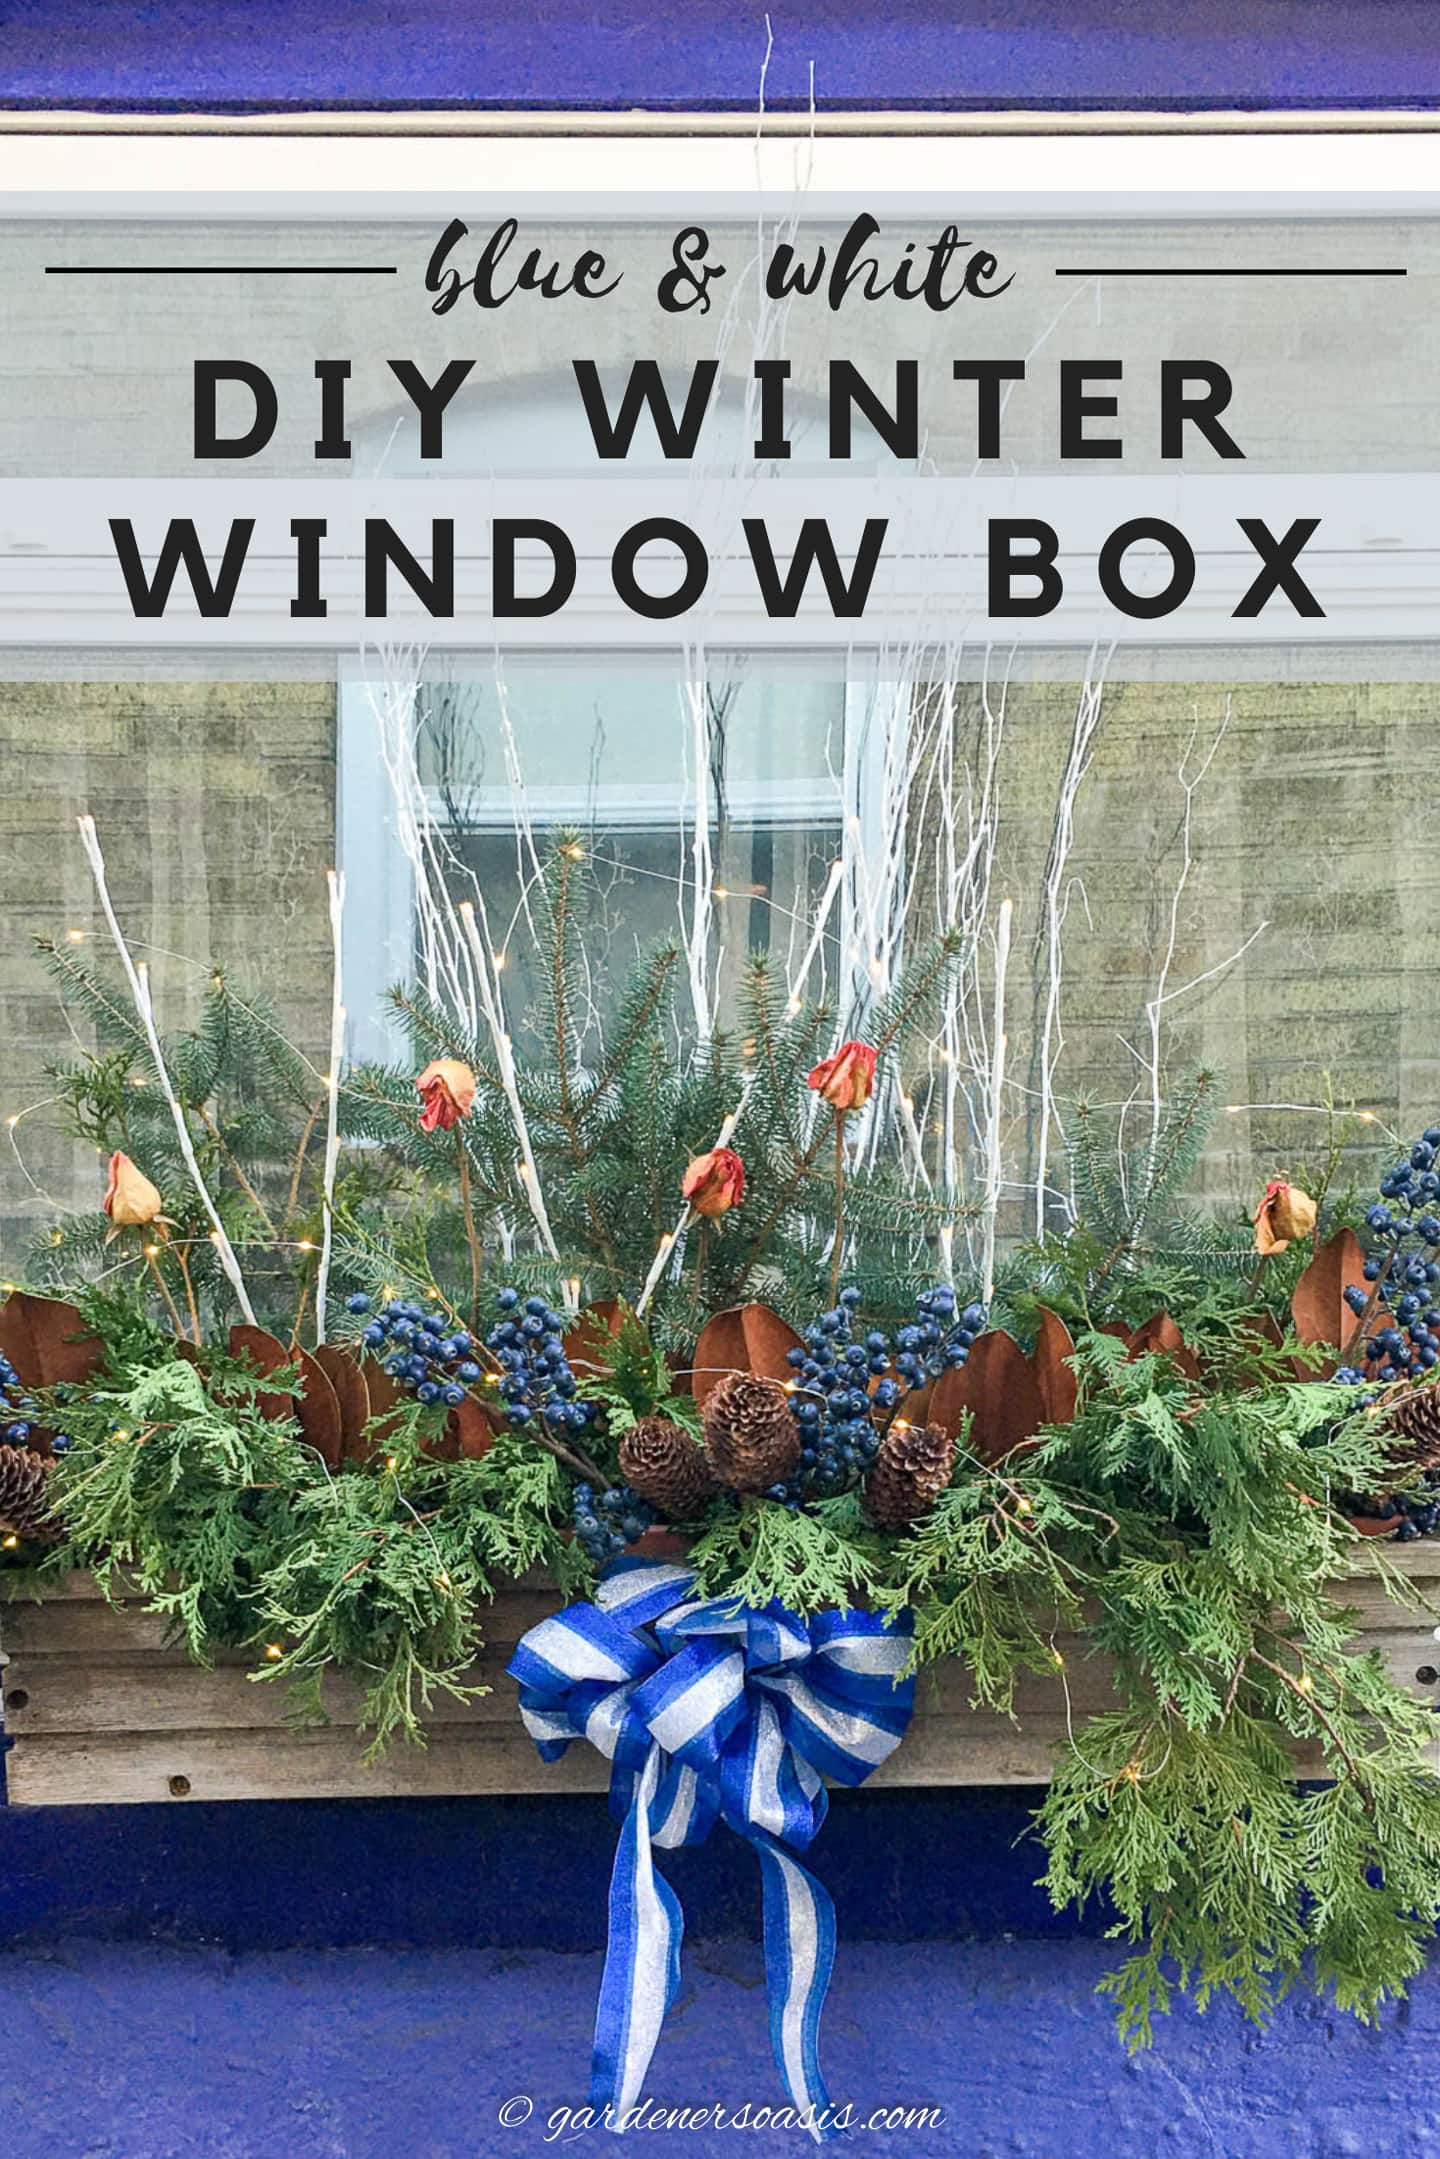 DIY winter window box with blue and white accents.